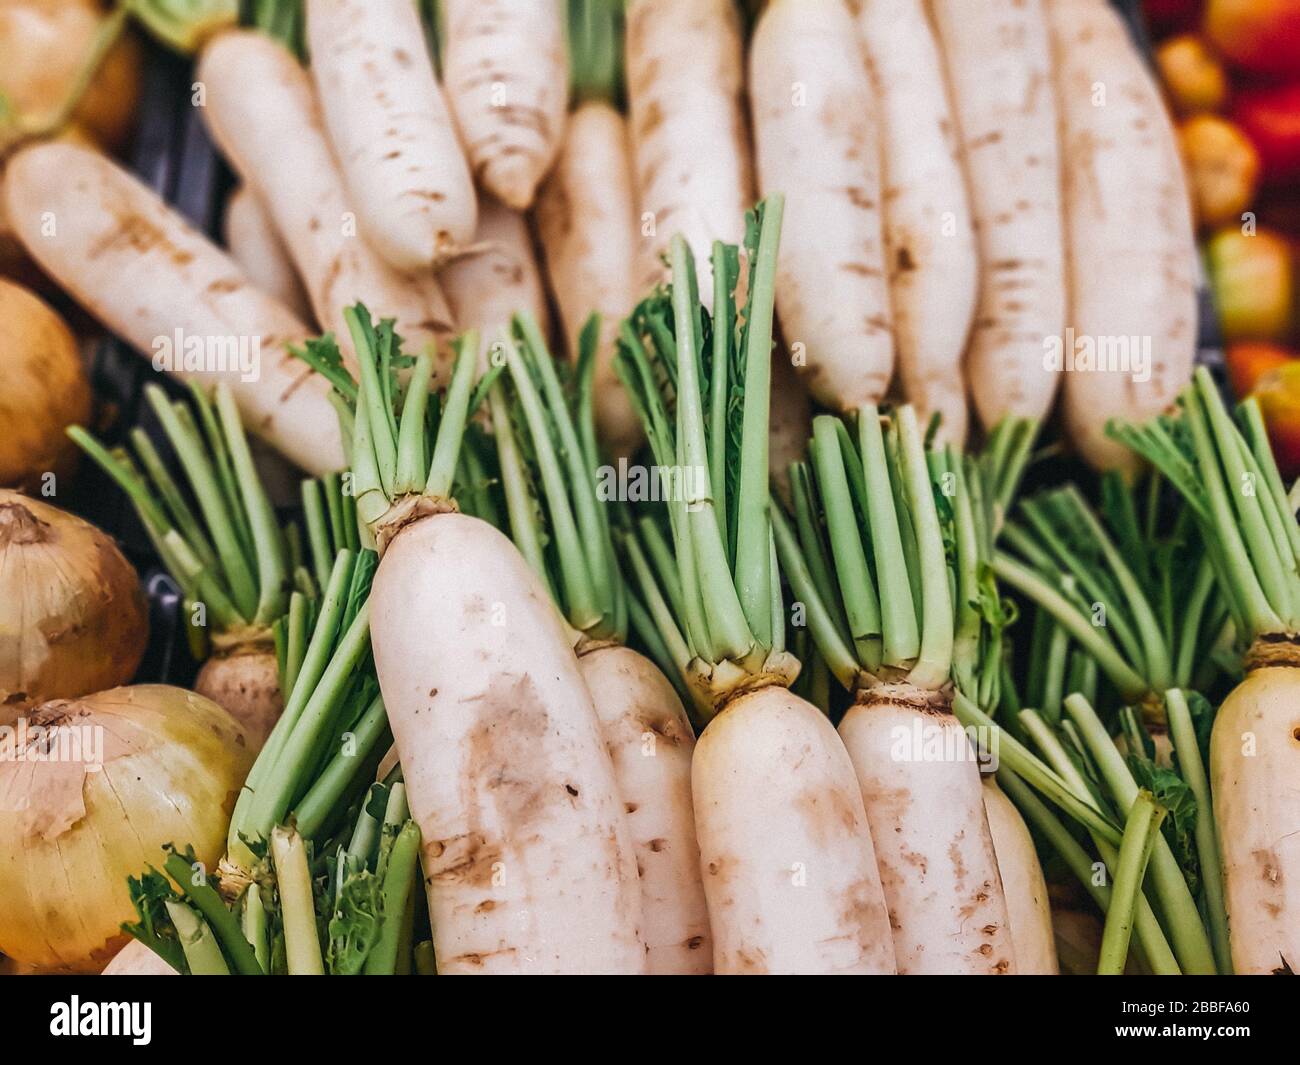 Organic local daikon radish vegetables or sell in the market, vegetable Stock Photo